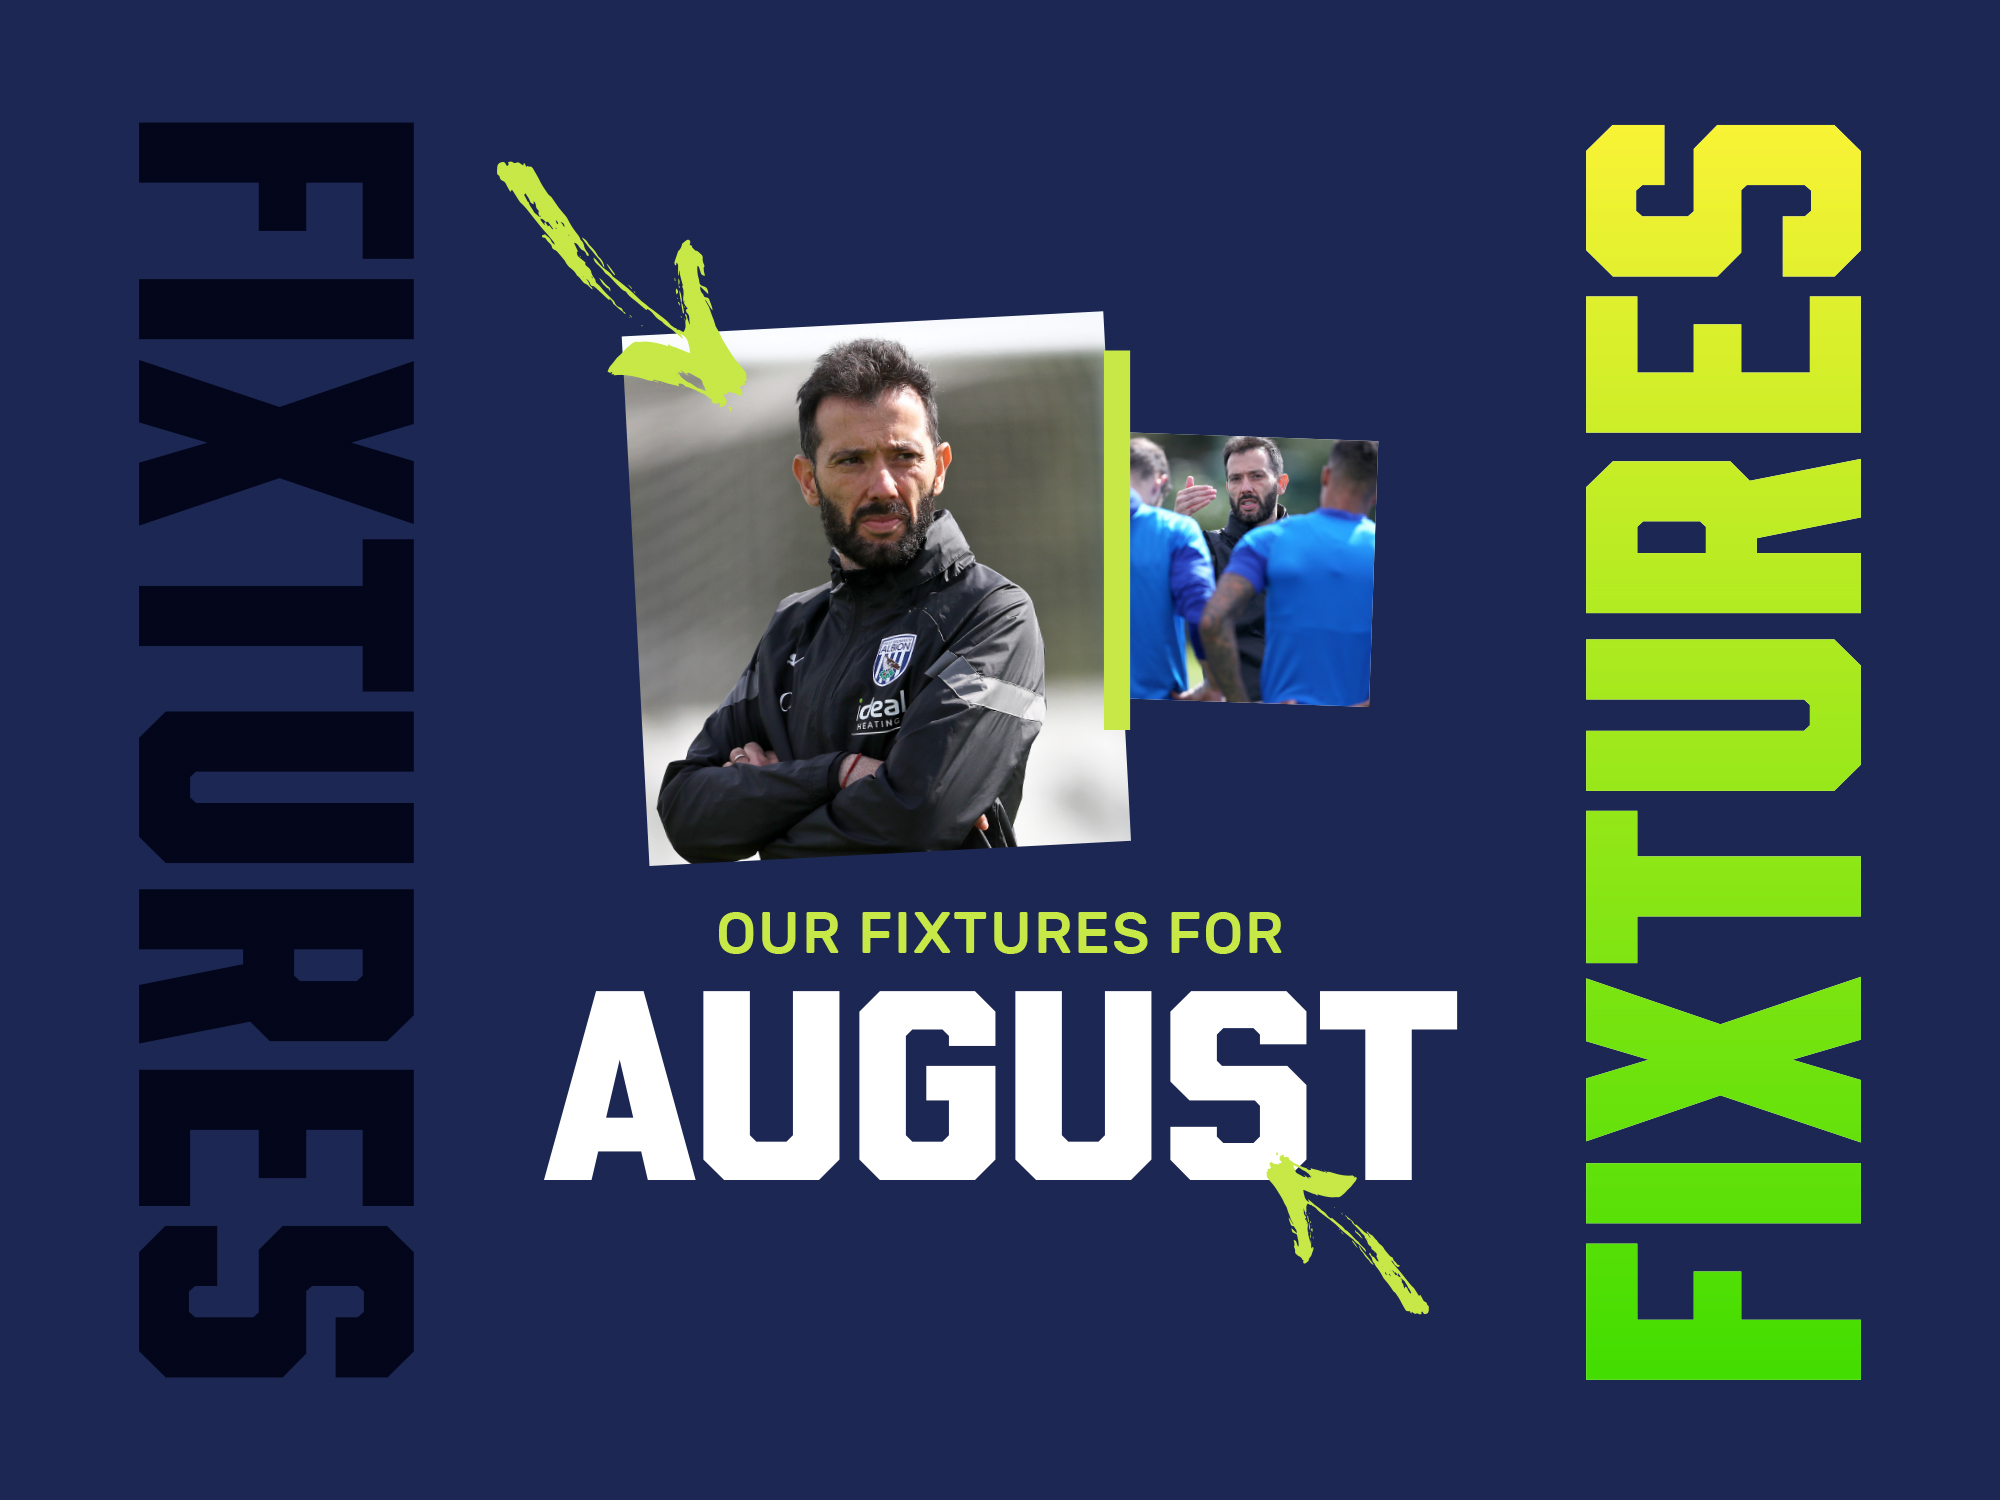 Albion's August fixtures graphic with two images of Carlos Corberán in